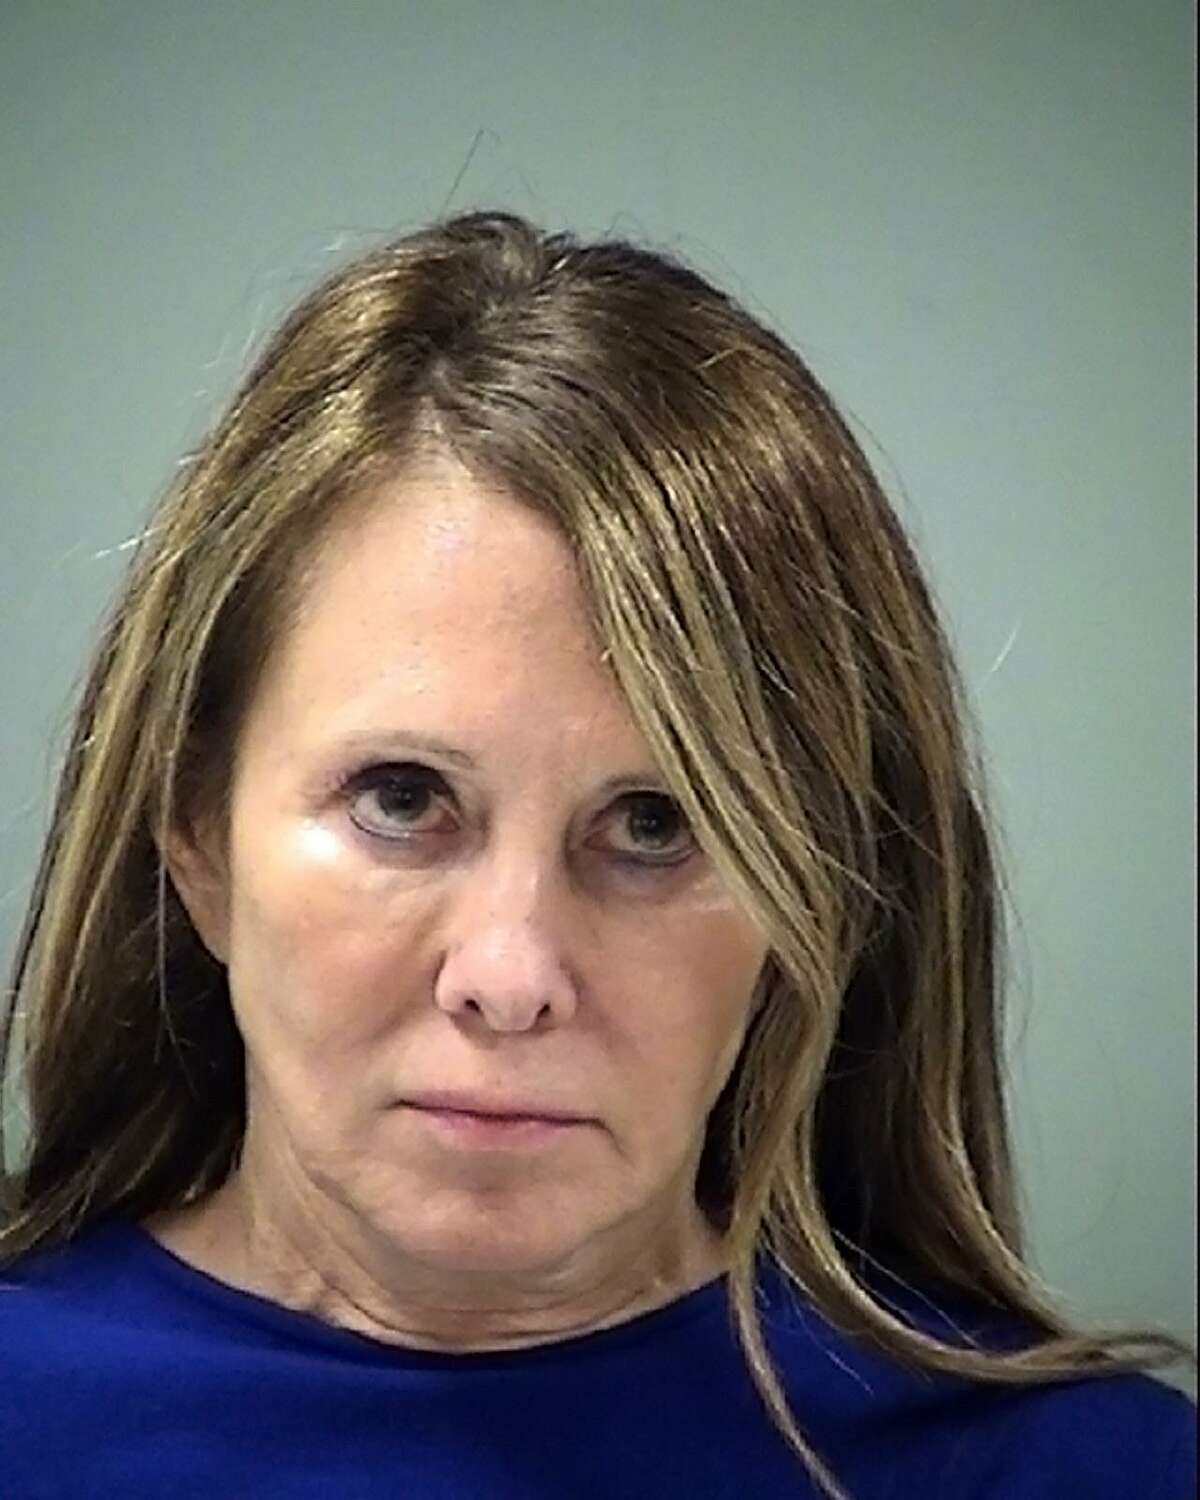 Catherine Amato, 63, was charged with driving while intoxicated after she nearly hit a San Antonio police officer's vehicle in February. The incident and actions of the DA's office that followed have been scrutinized by the media and become a talking point in the race for District Attorney Nico LaHood's seat.